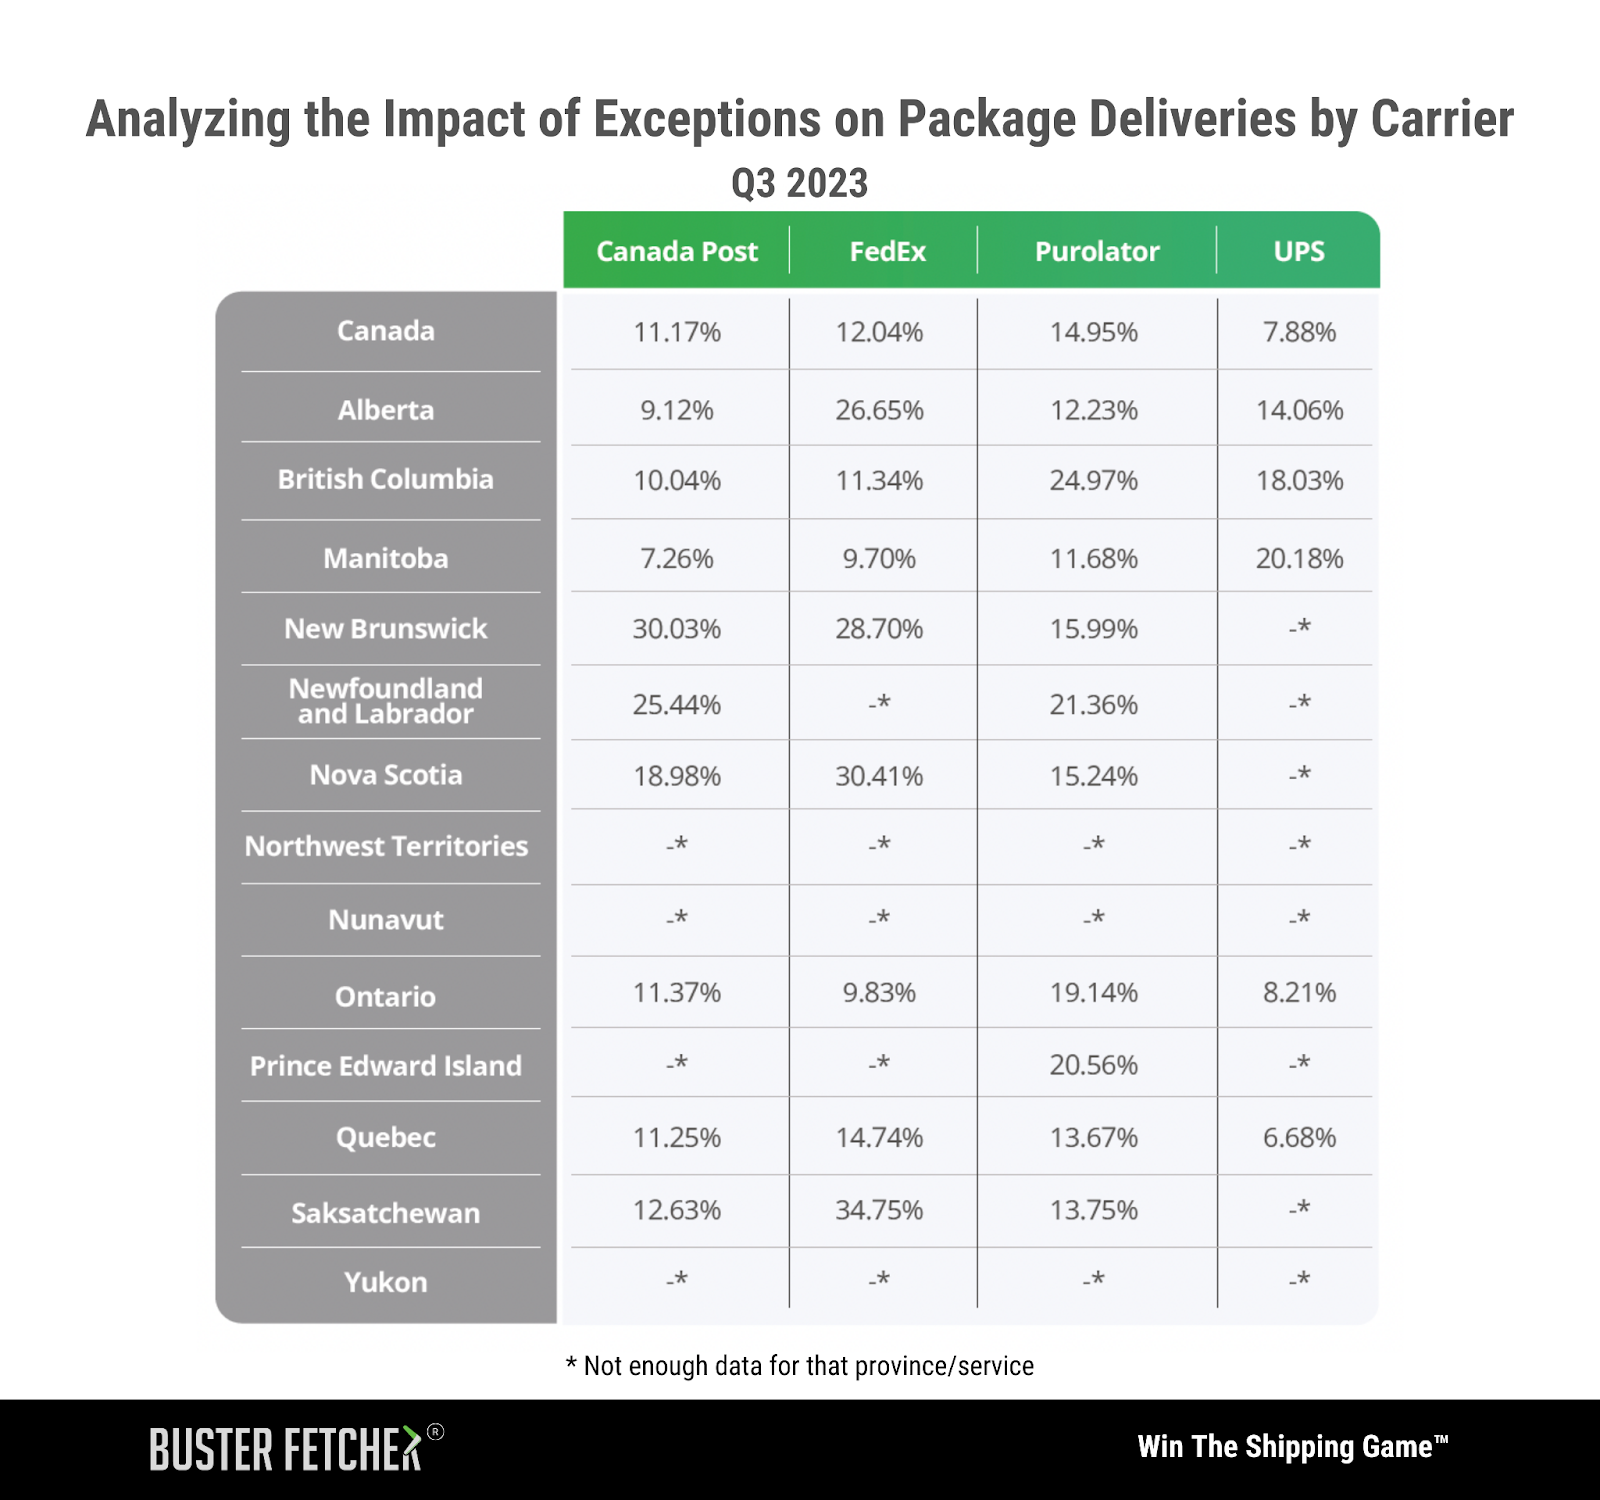 Analyzinf the Impact of Exceptions on Package Deliveries by Carrier